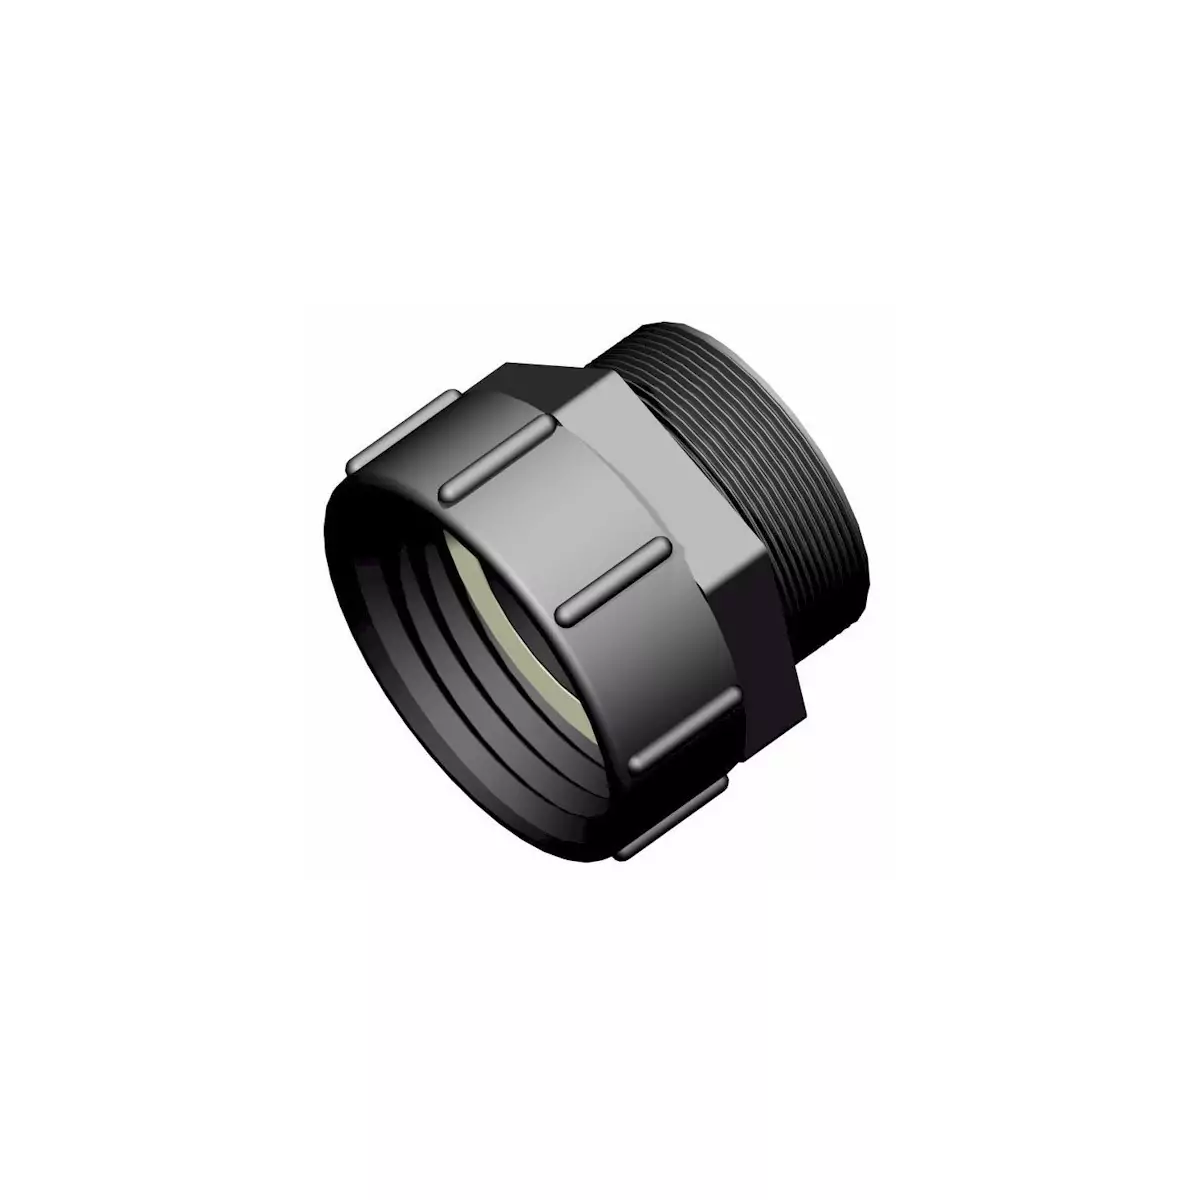 Product sheet S100x8 female connector - 3 "BSP male thread